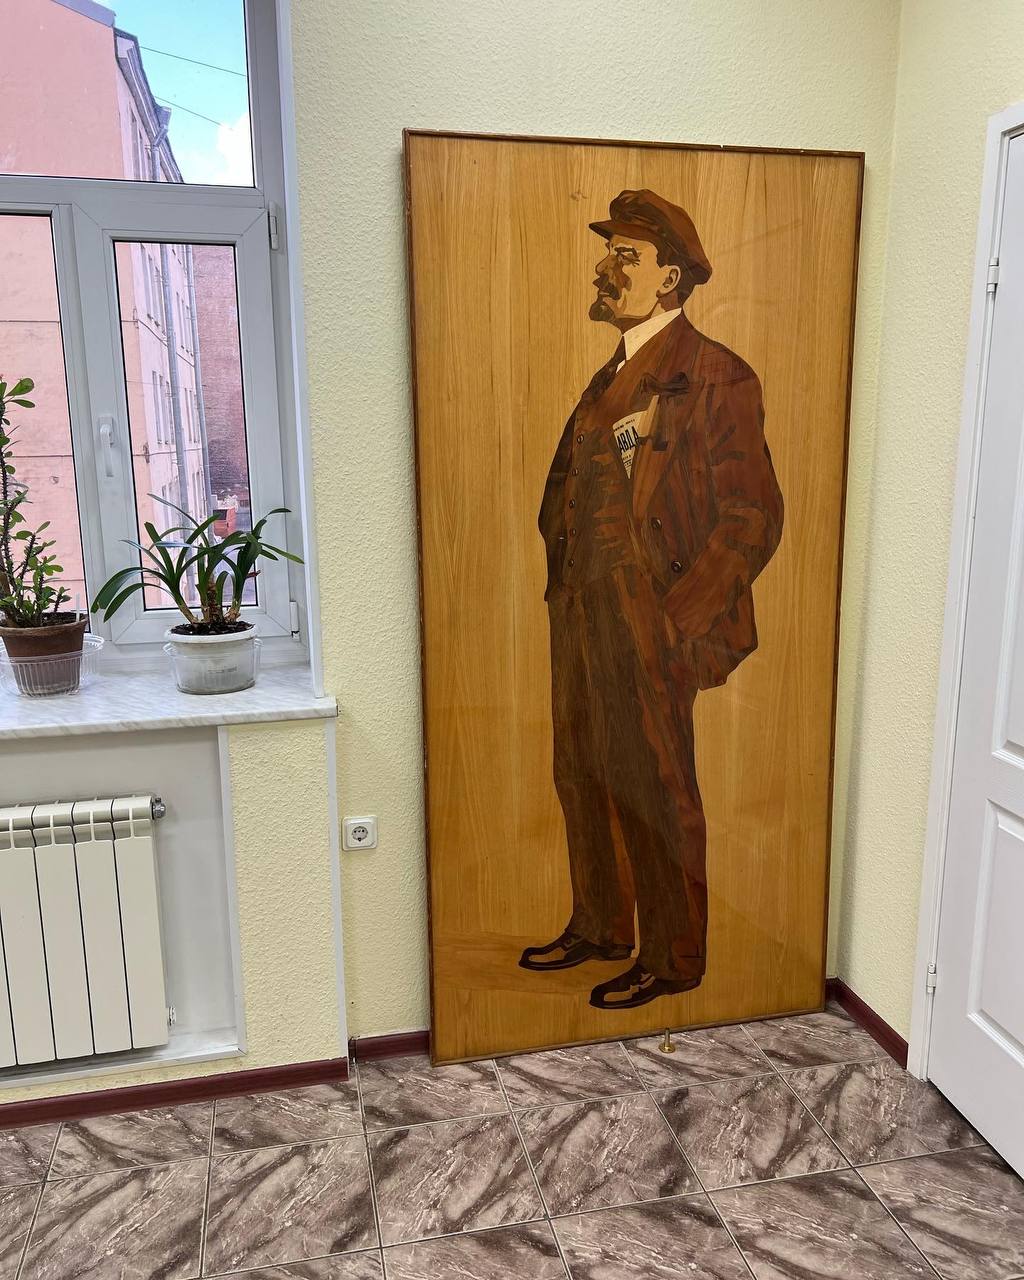 A carving of Bolshevik leader Vladimir Lenin in a wooden door at the KPRF office / credit: Fergie Chambers